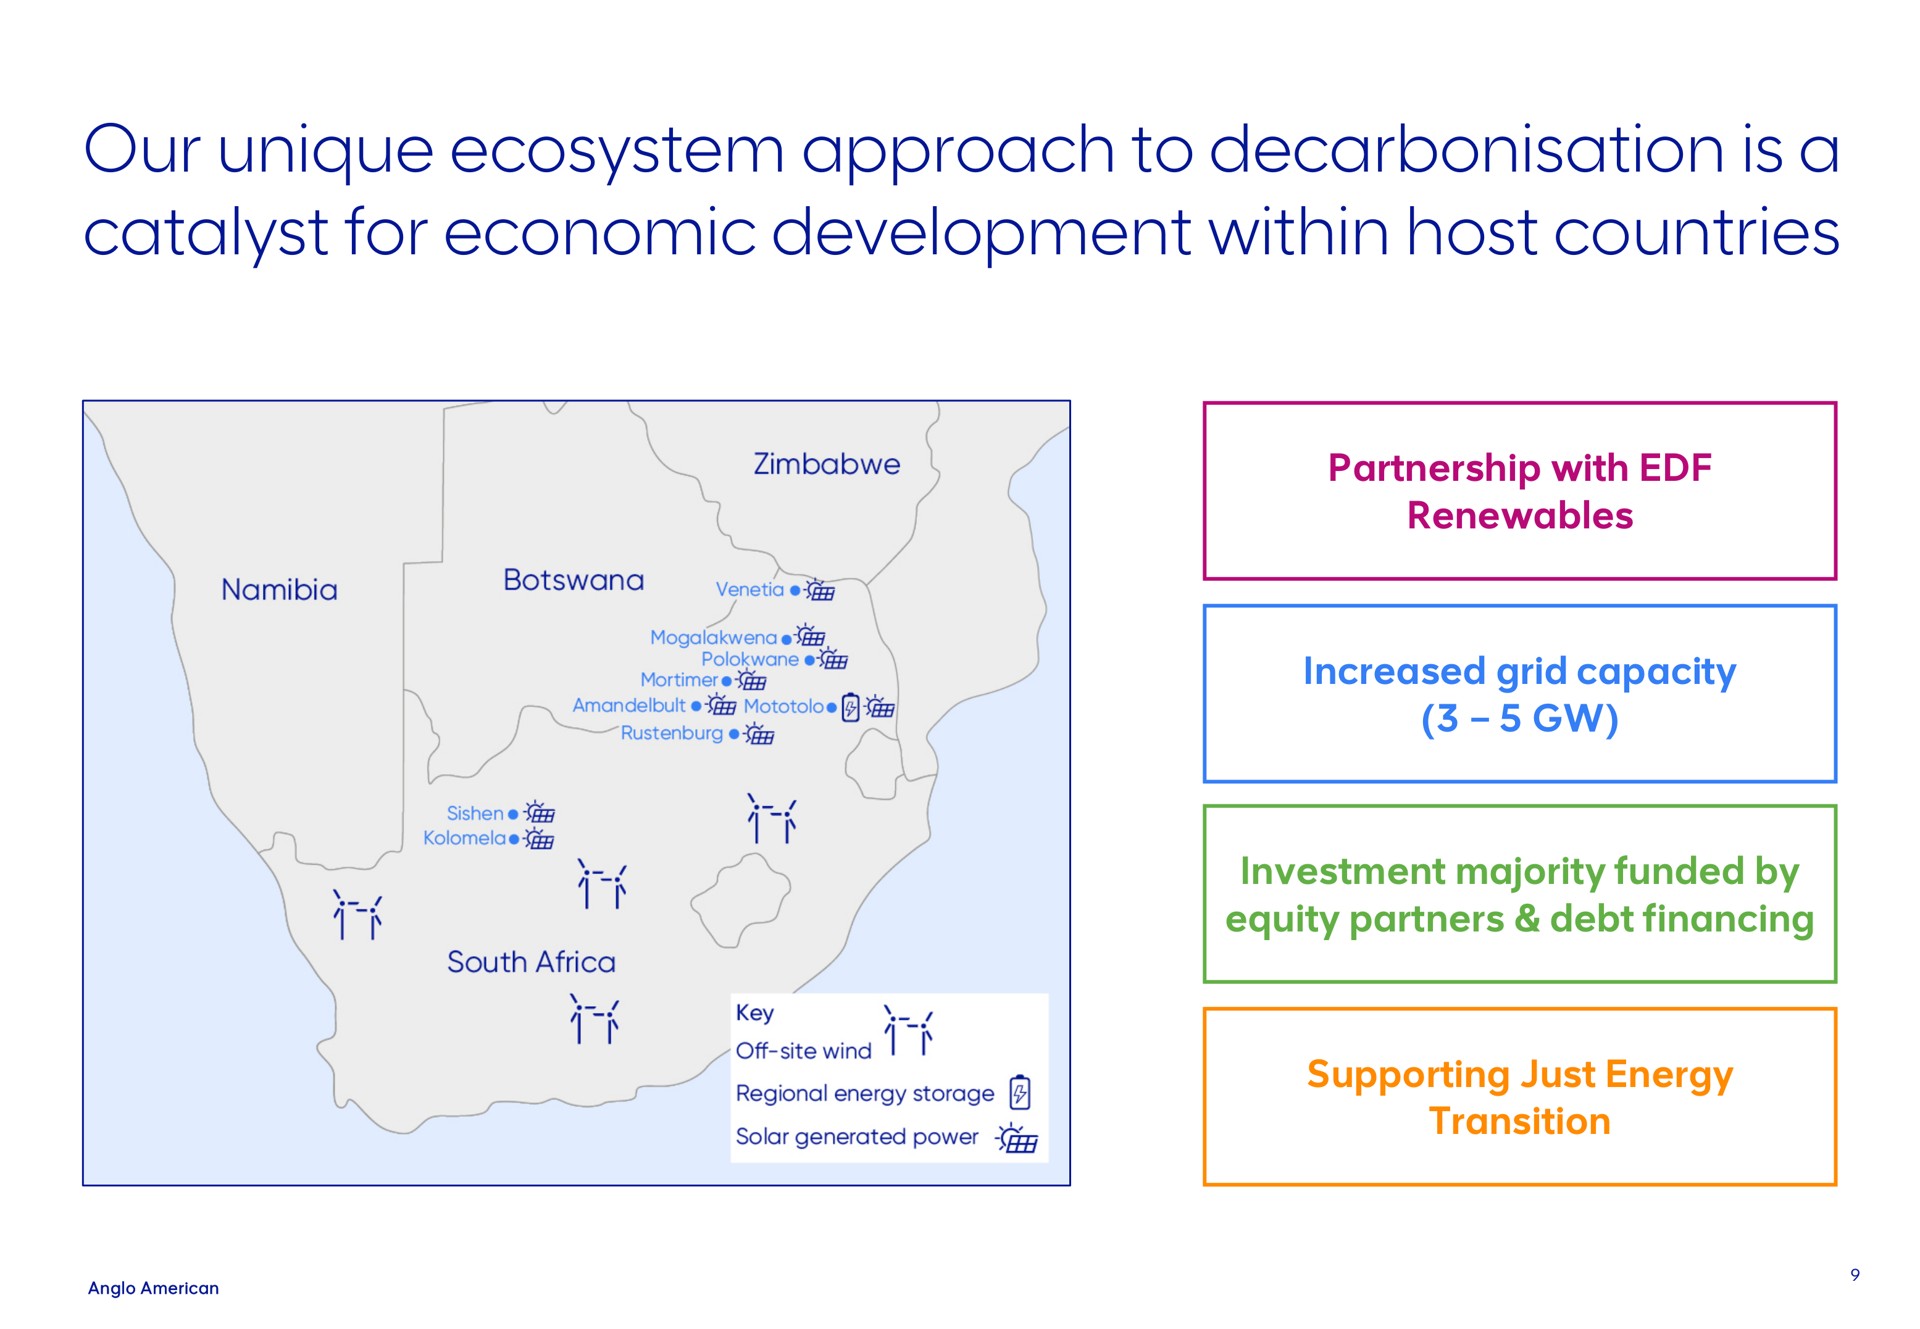 our unique ecosystem approach to is a catalyst for economic development within host countries | AngloAmerican